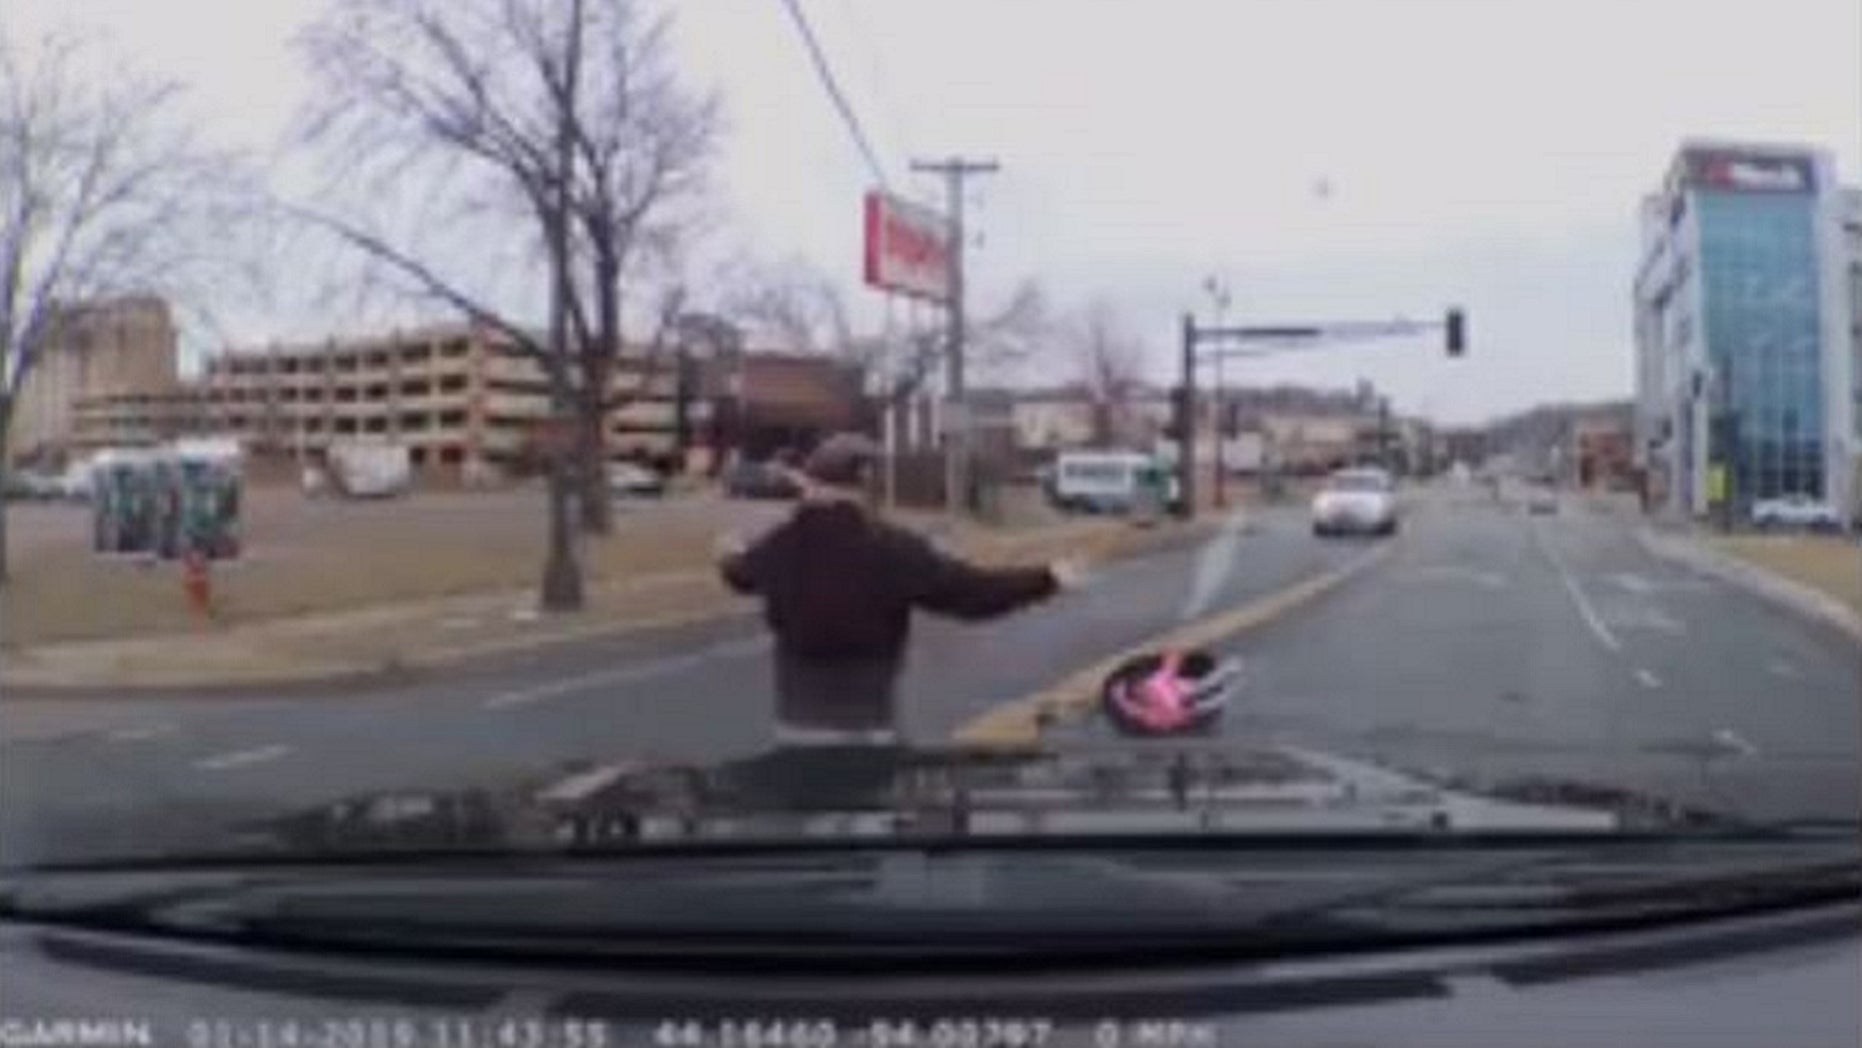 Girl, 2, flies out of vehicle in car seat, dash cam video shows